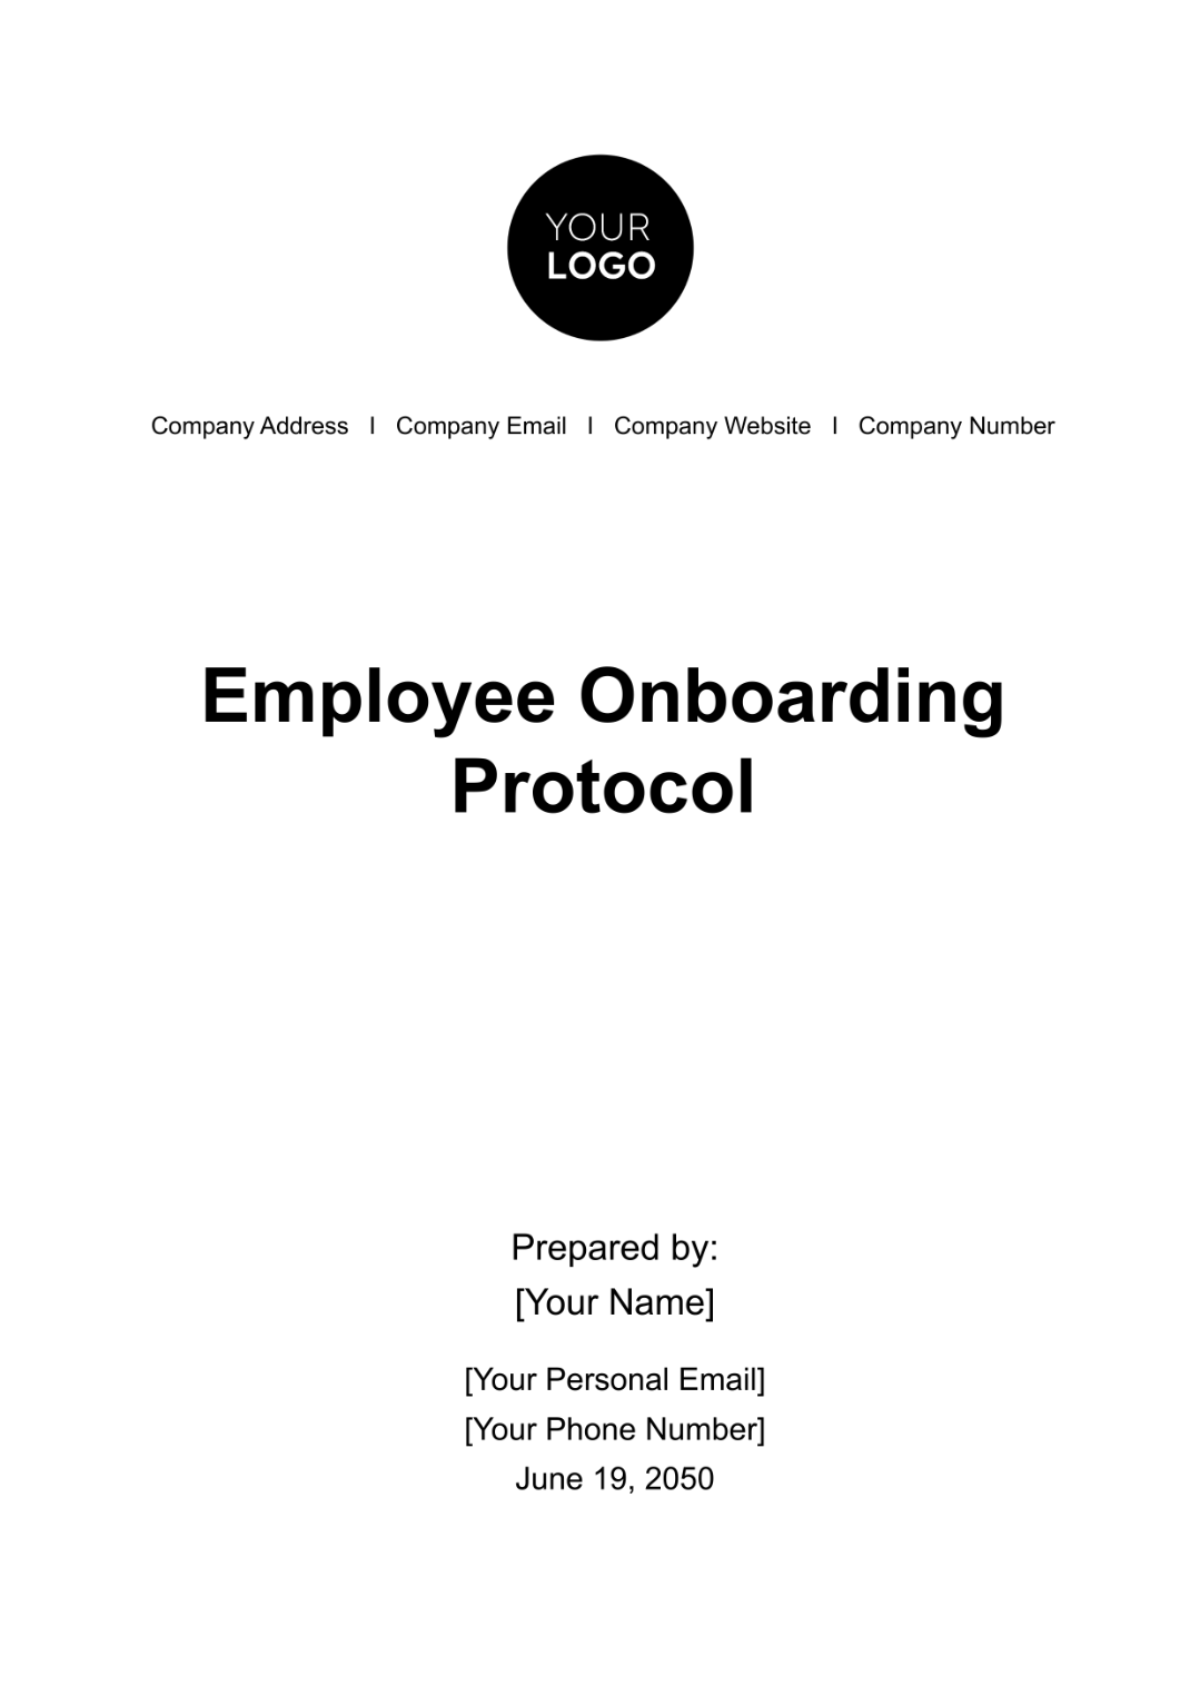 Free Employee Onboarding Protocol HR Template